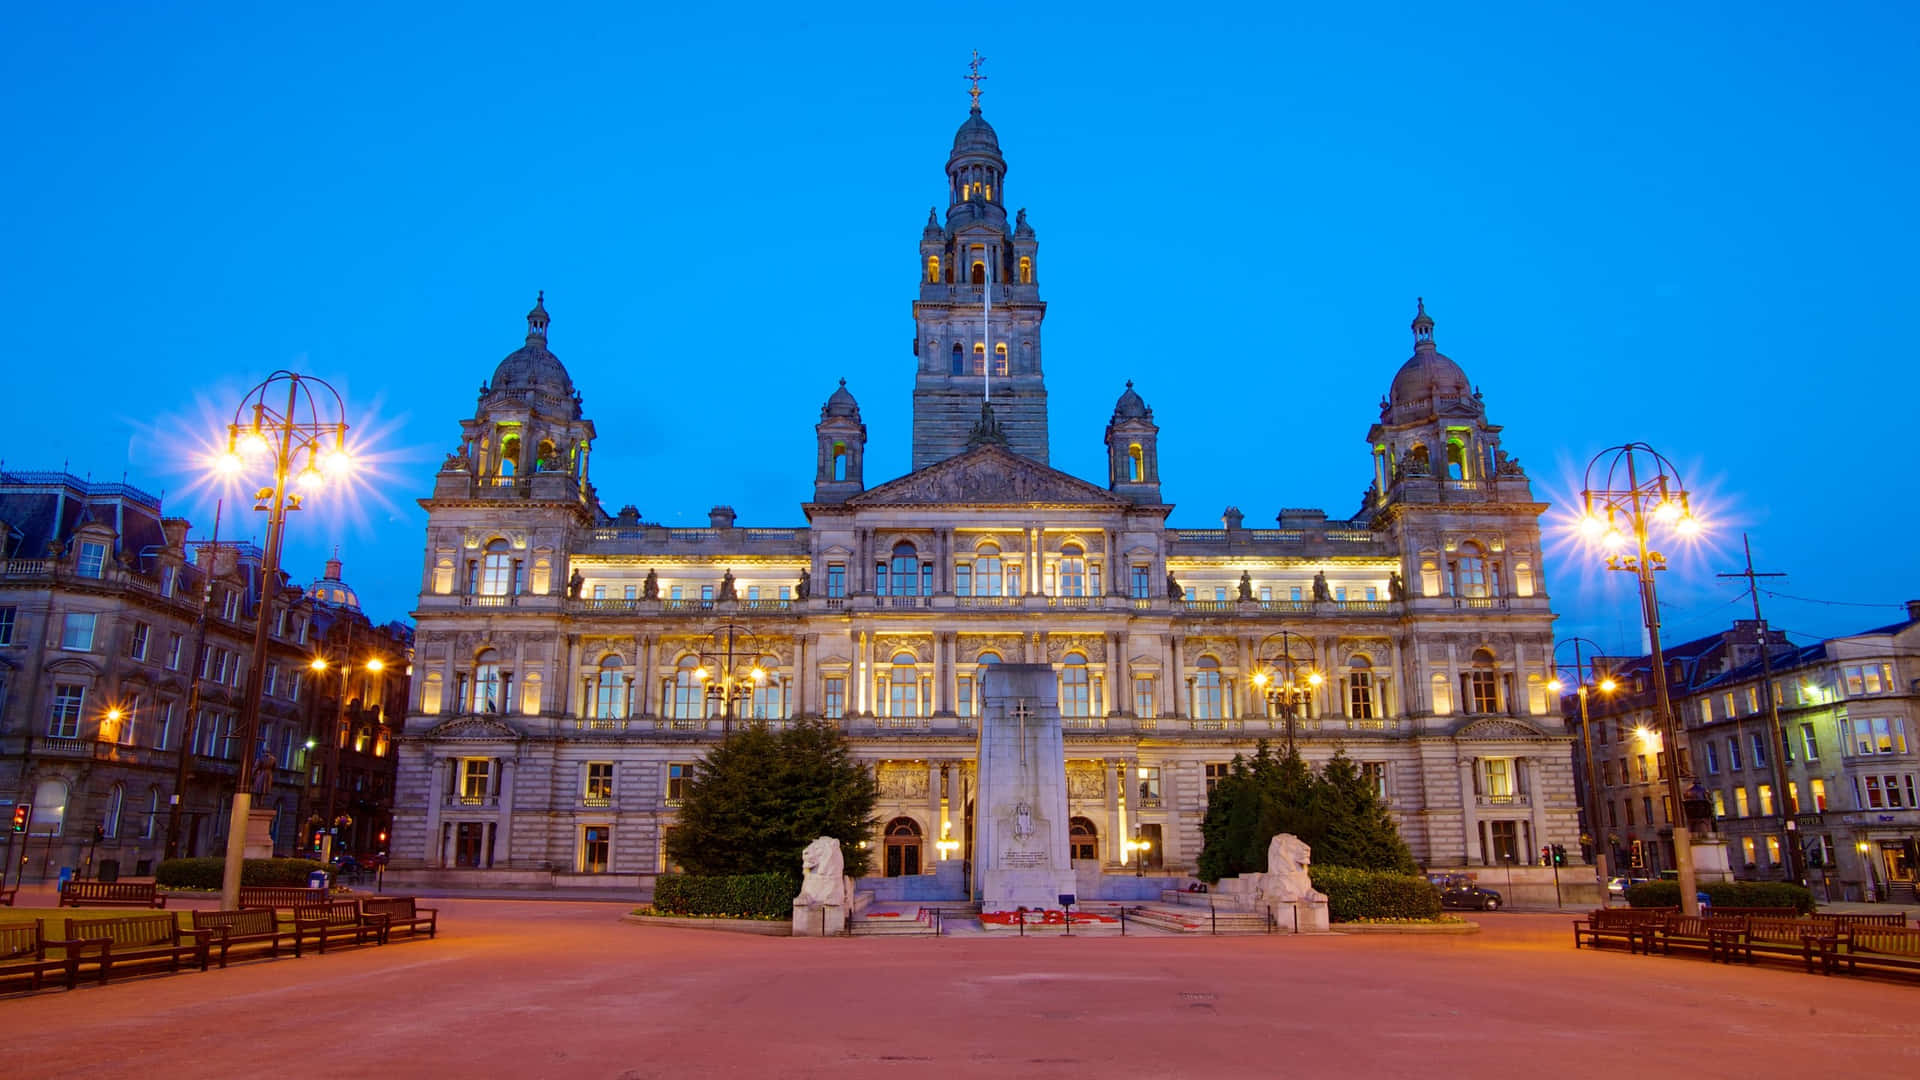 Glasgow City Chambers Evening View Wallpaper